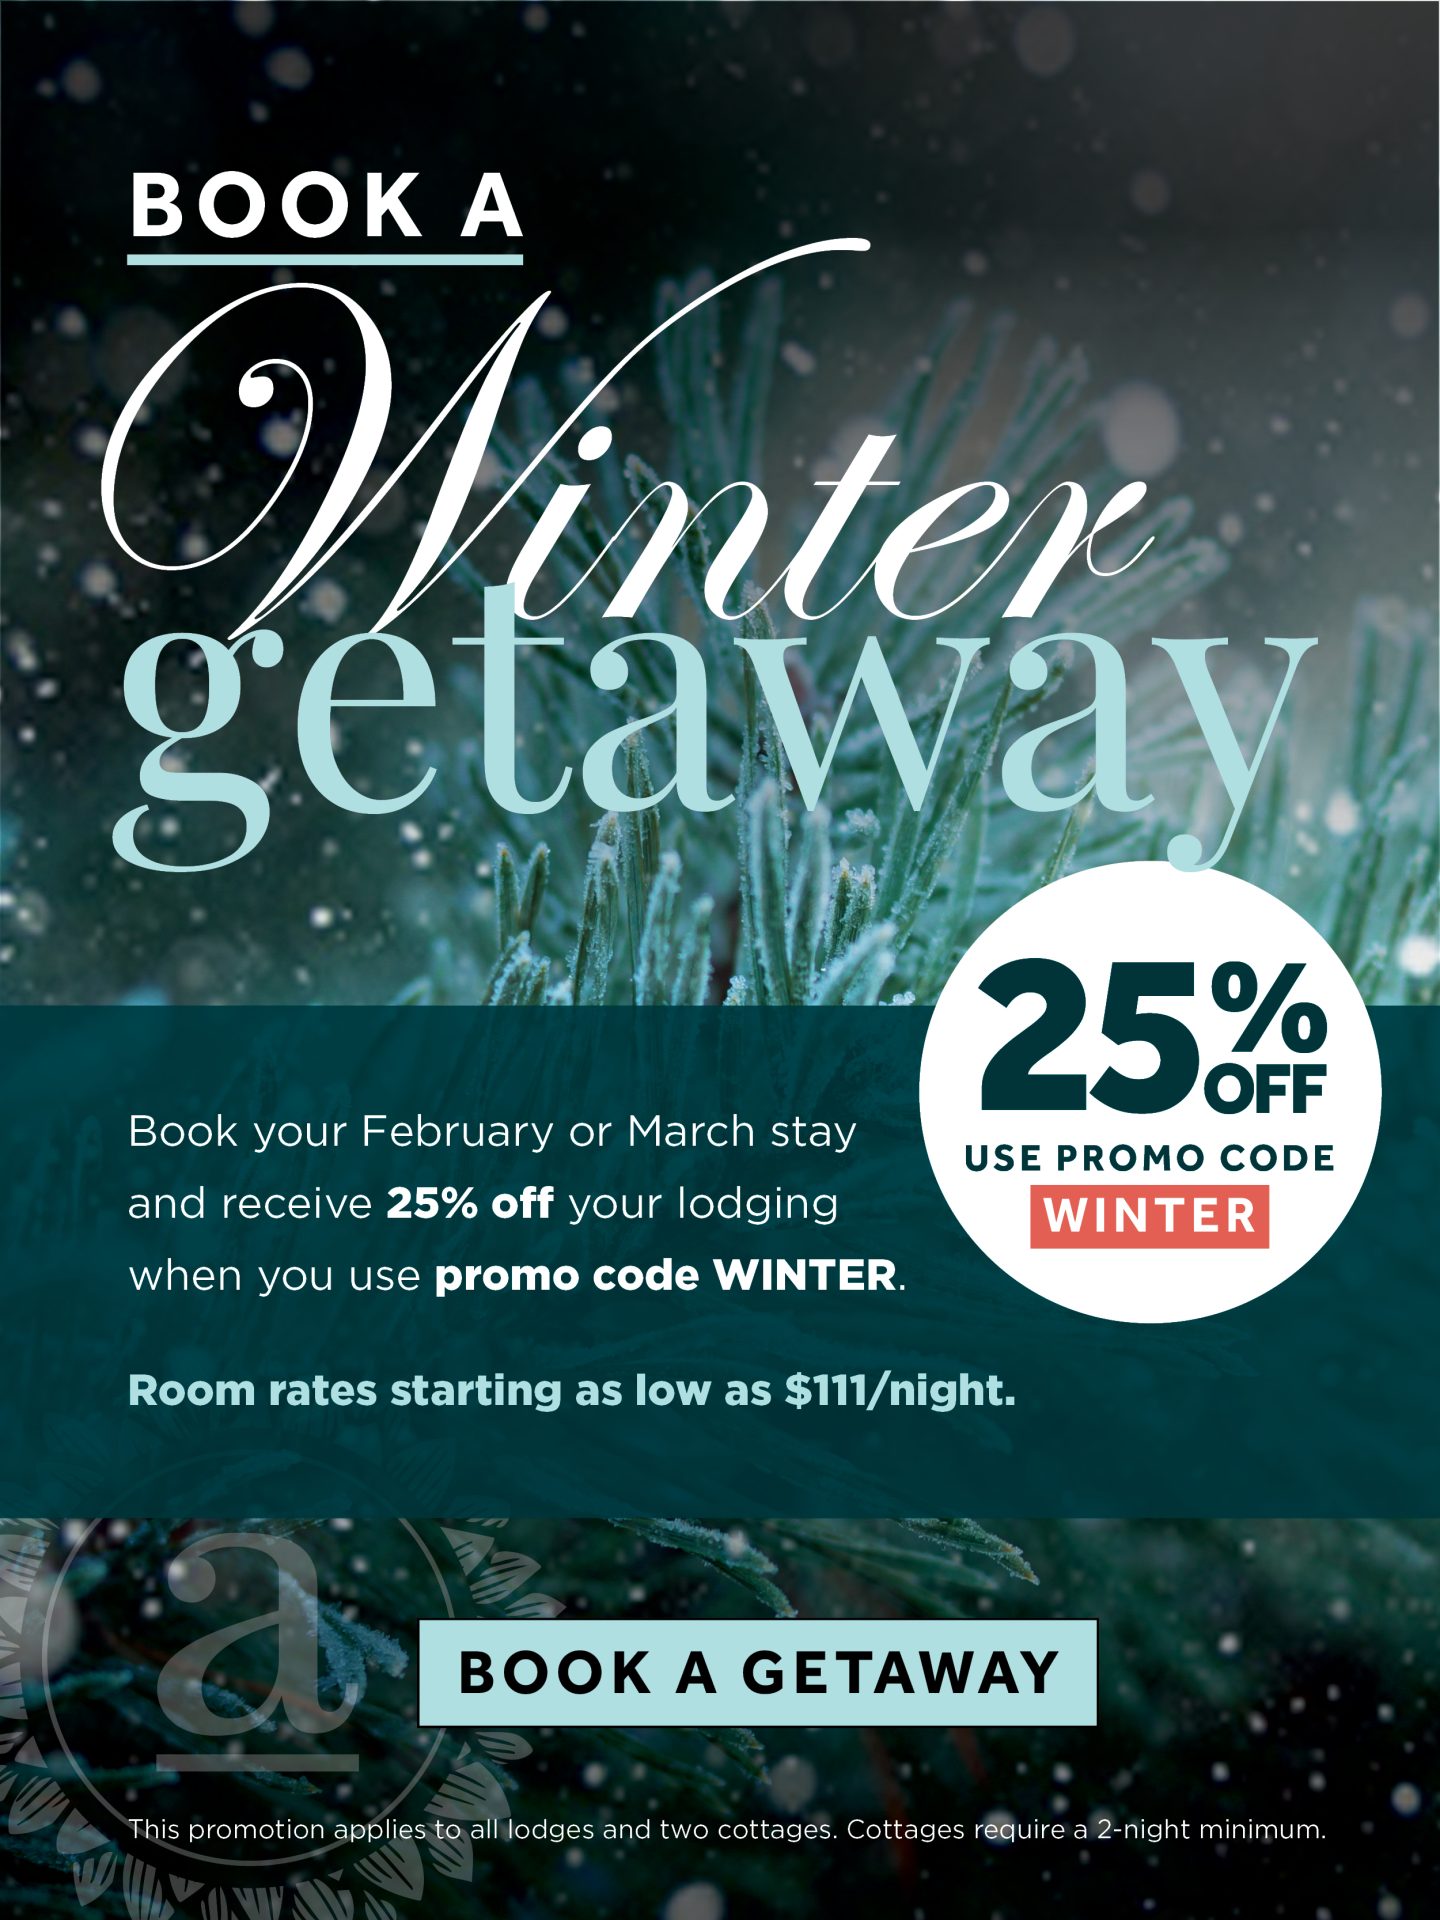 Book a winter getaway and get 25% off uoir lodging when you use promo code WINTER. Room rates starting as low as $111/night.